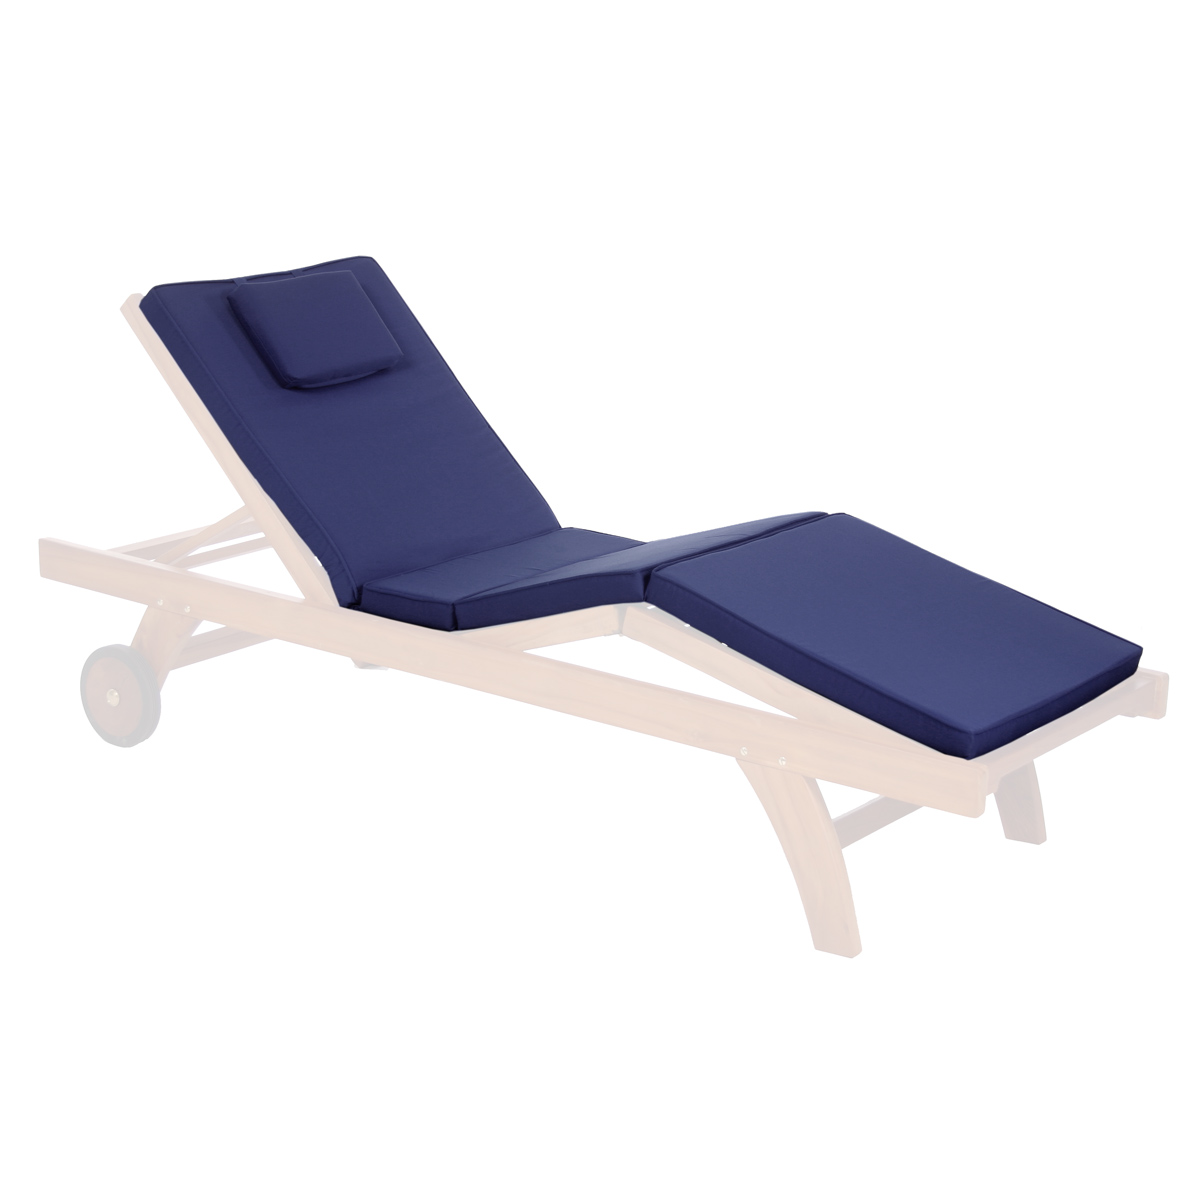 All Things Cedar  Chaise Lounger Cushion - Blue - image 2 of 3